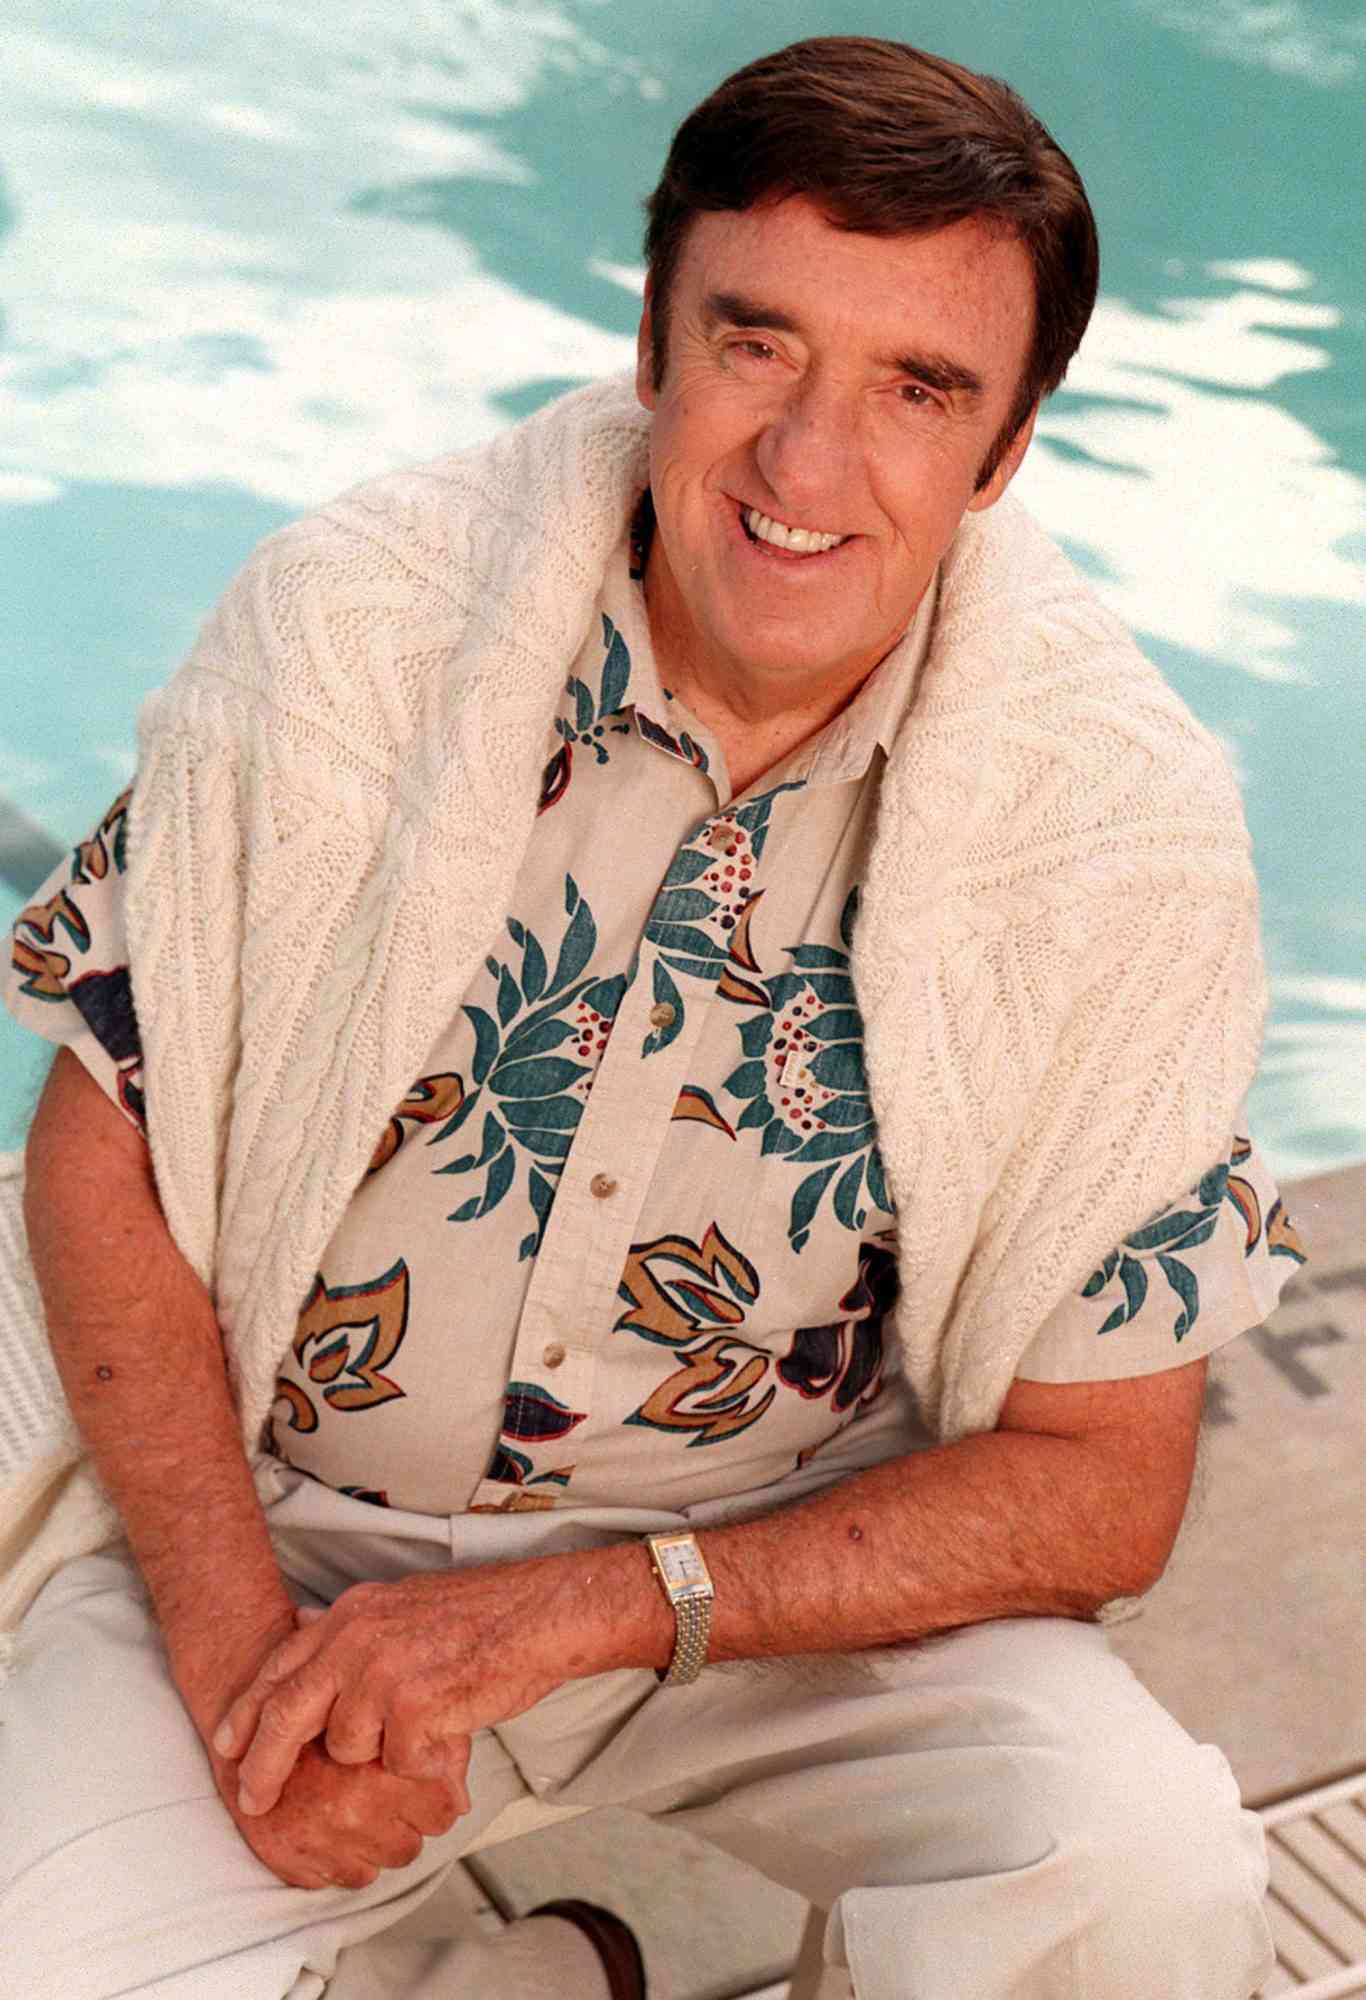 JIM NABORS, The former Gomer Pyle star is doing a publicity blitz after a liver transplant. He has a